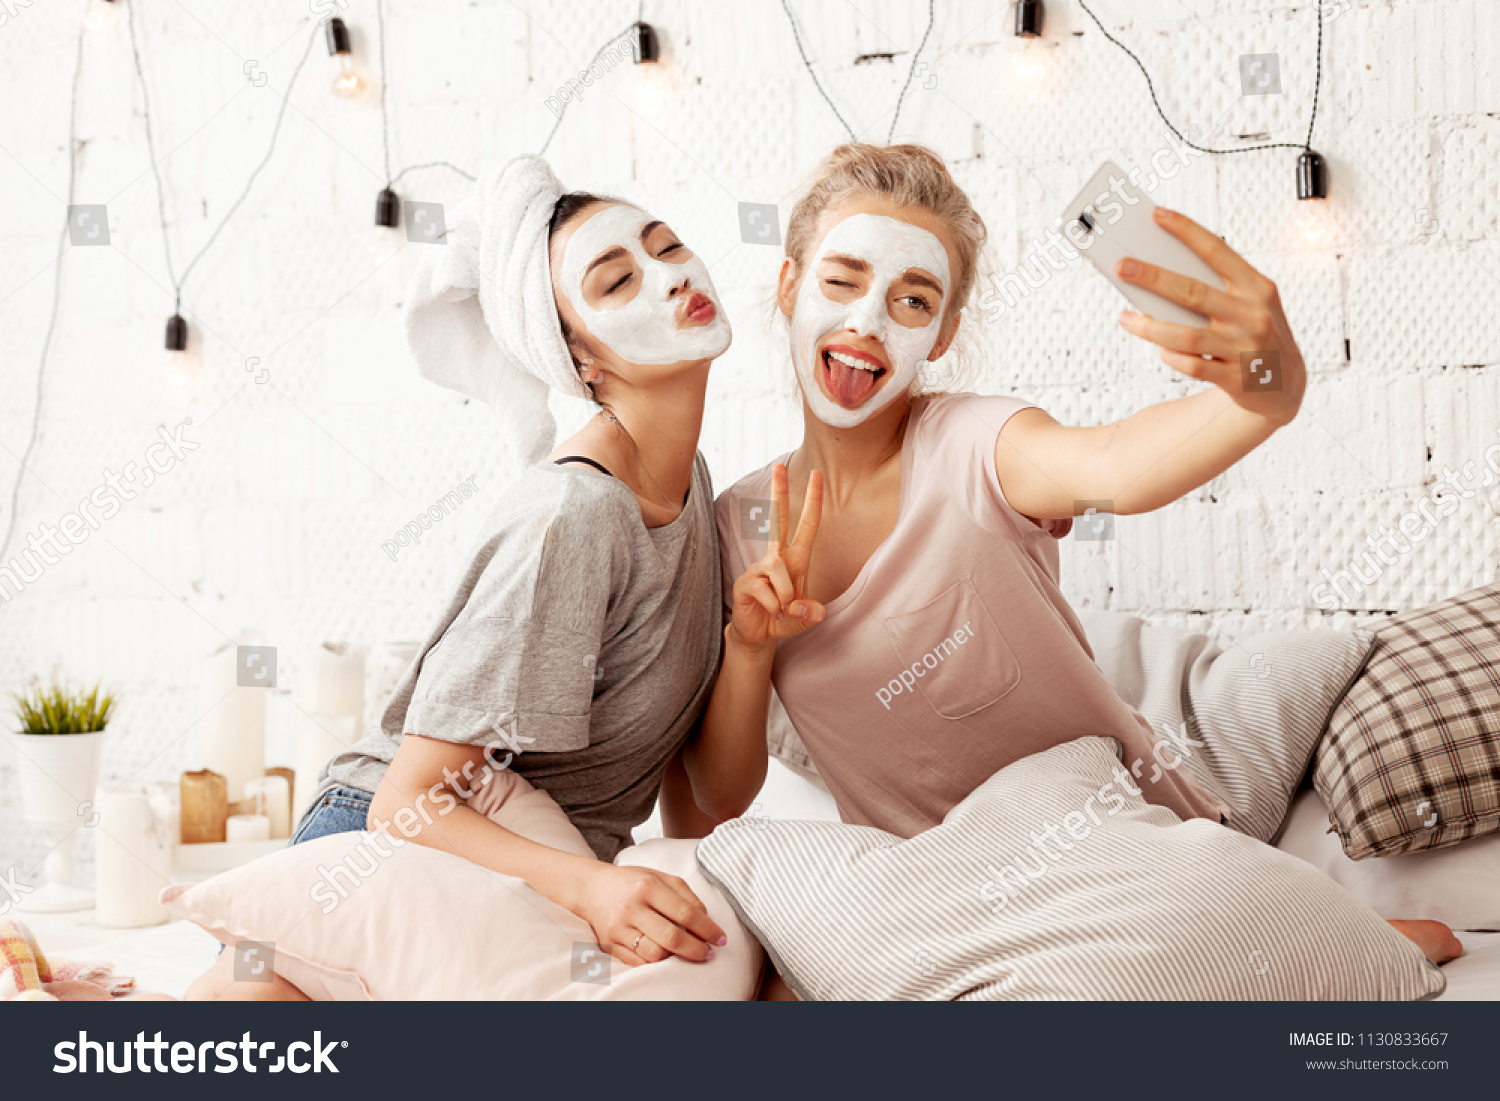 Portrait of cute young women sending kisses smiling sweetly and making amusing faces for picture. Cheerful lovely friends taking selfie at home with facial cosmetic mask. Skincare concept #1130833667